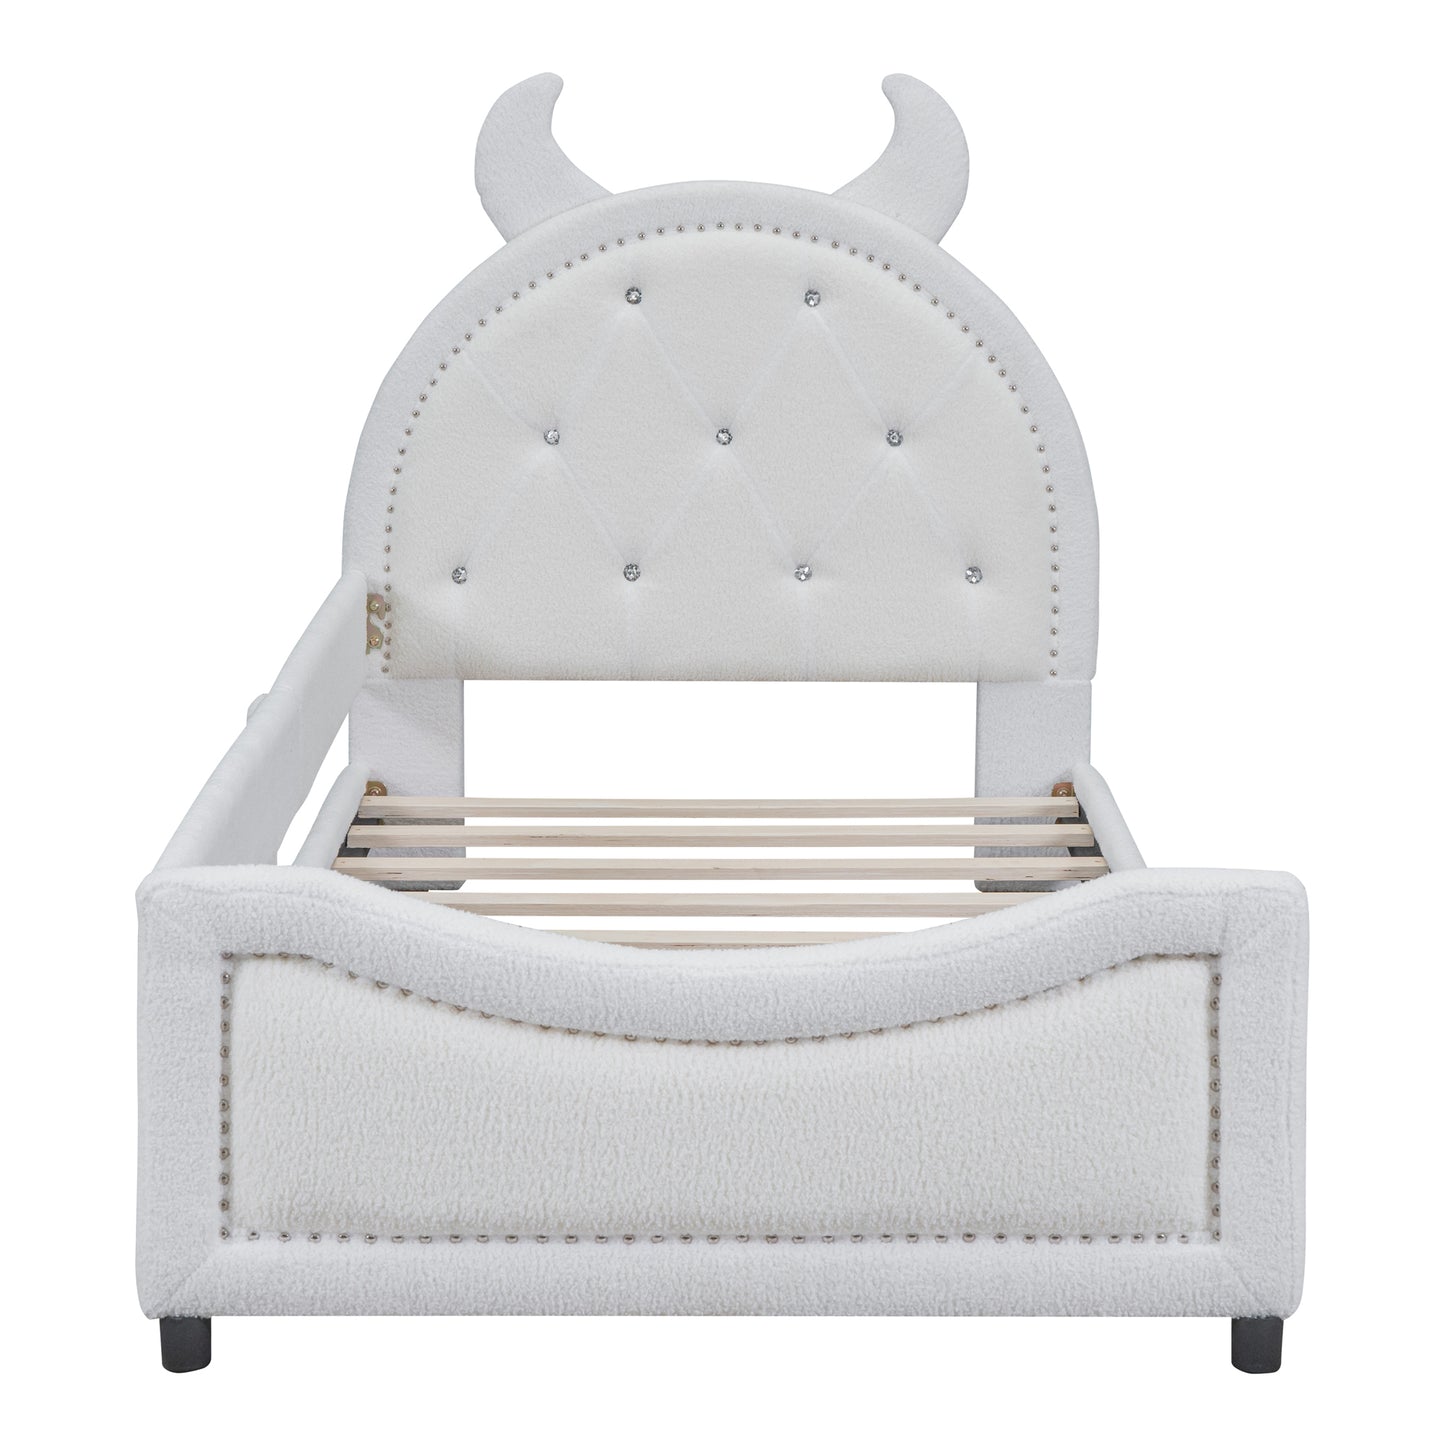 Teddy Fleece Twin Size Upholstered Daybed with OX Horn Shaped Headboard, White